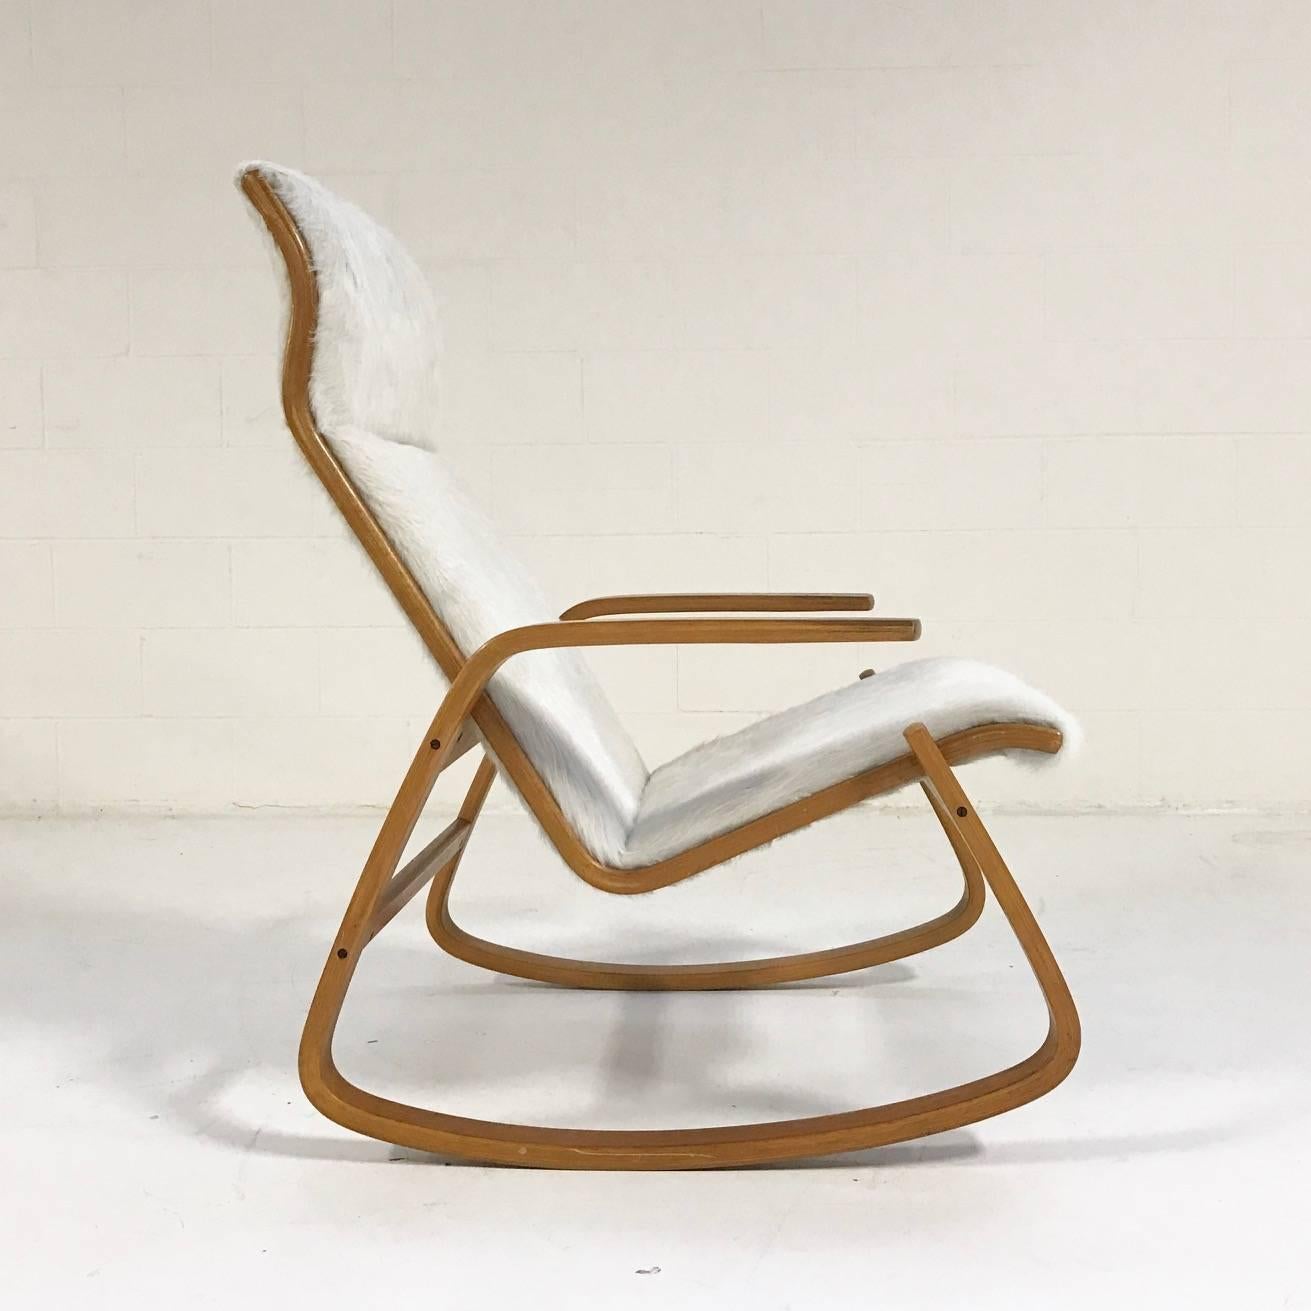 This rocker rocks! Simple lines, functional, minimal ~ the hallmarks of Scandinavian design. It’s incredibly comfortable since our master upholsterers restored the back and seat structure with brand new foam and upholstered in our favorite ivory